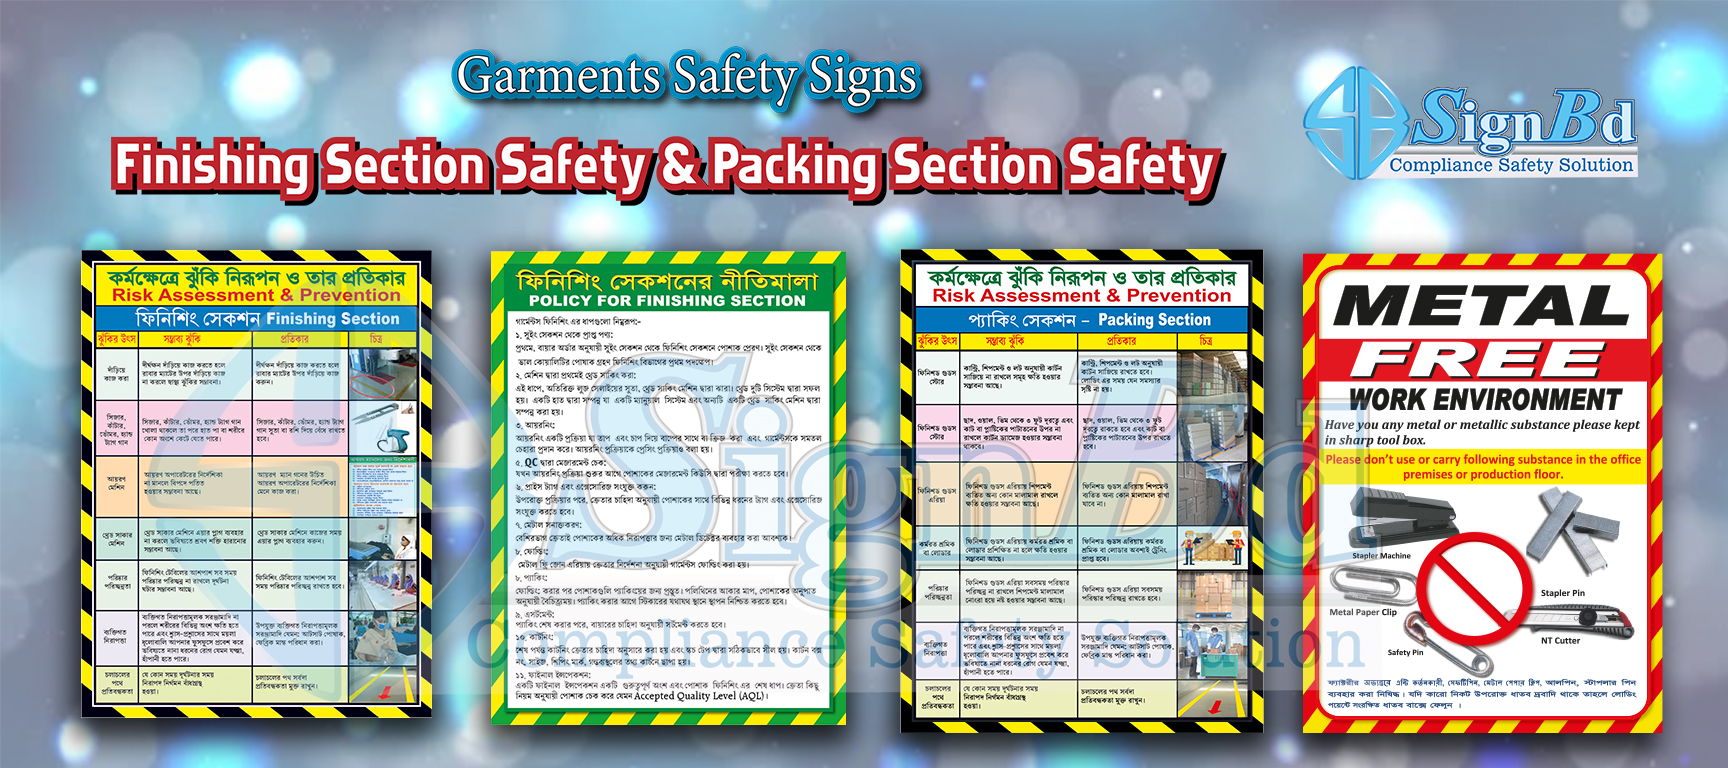 Garments Safety Sign